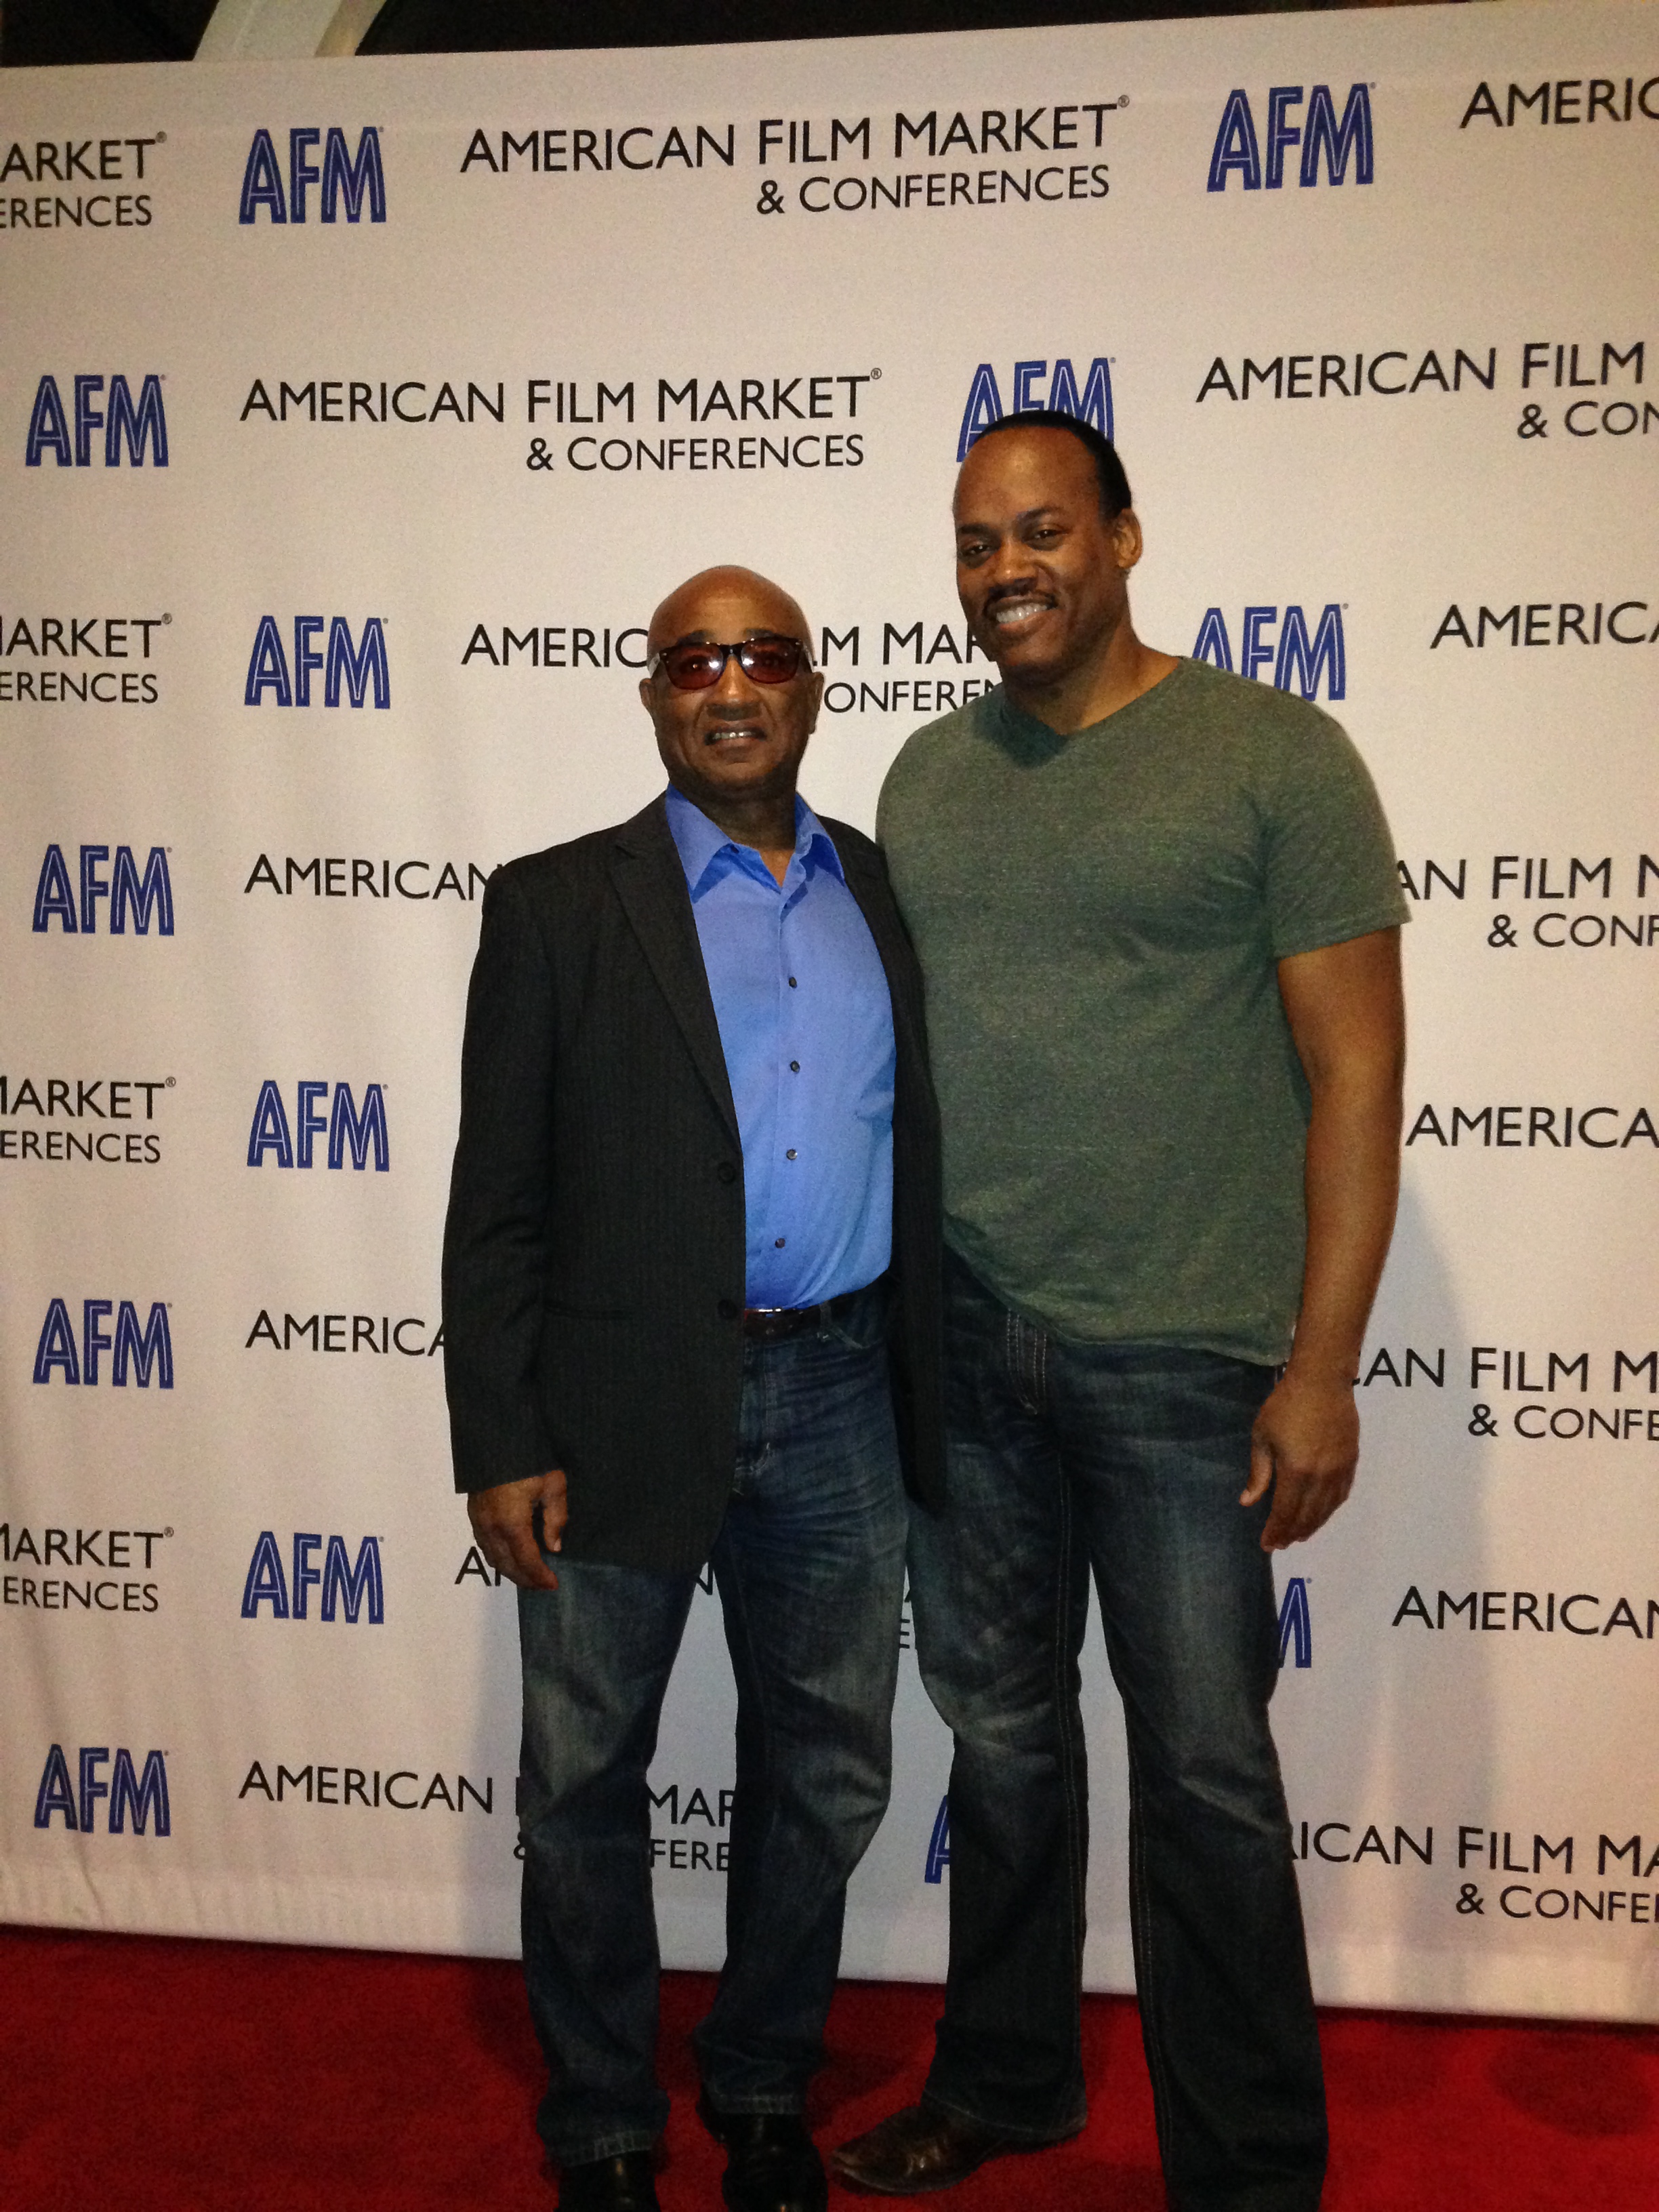 AFM 2014. Chilling in the Loews Hotel with Mr. Solomon J LeFlore, film finance guru and Producer on 